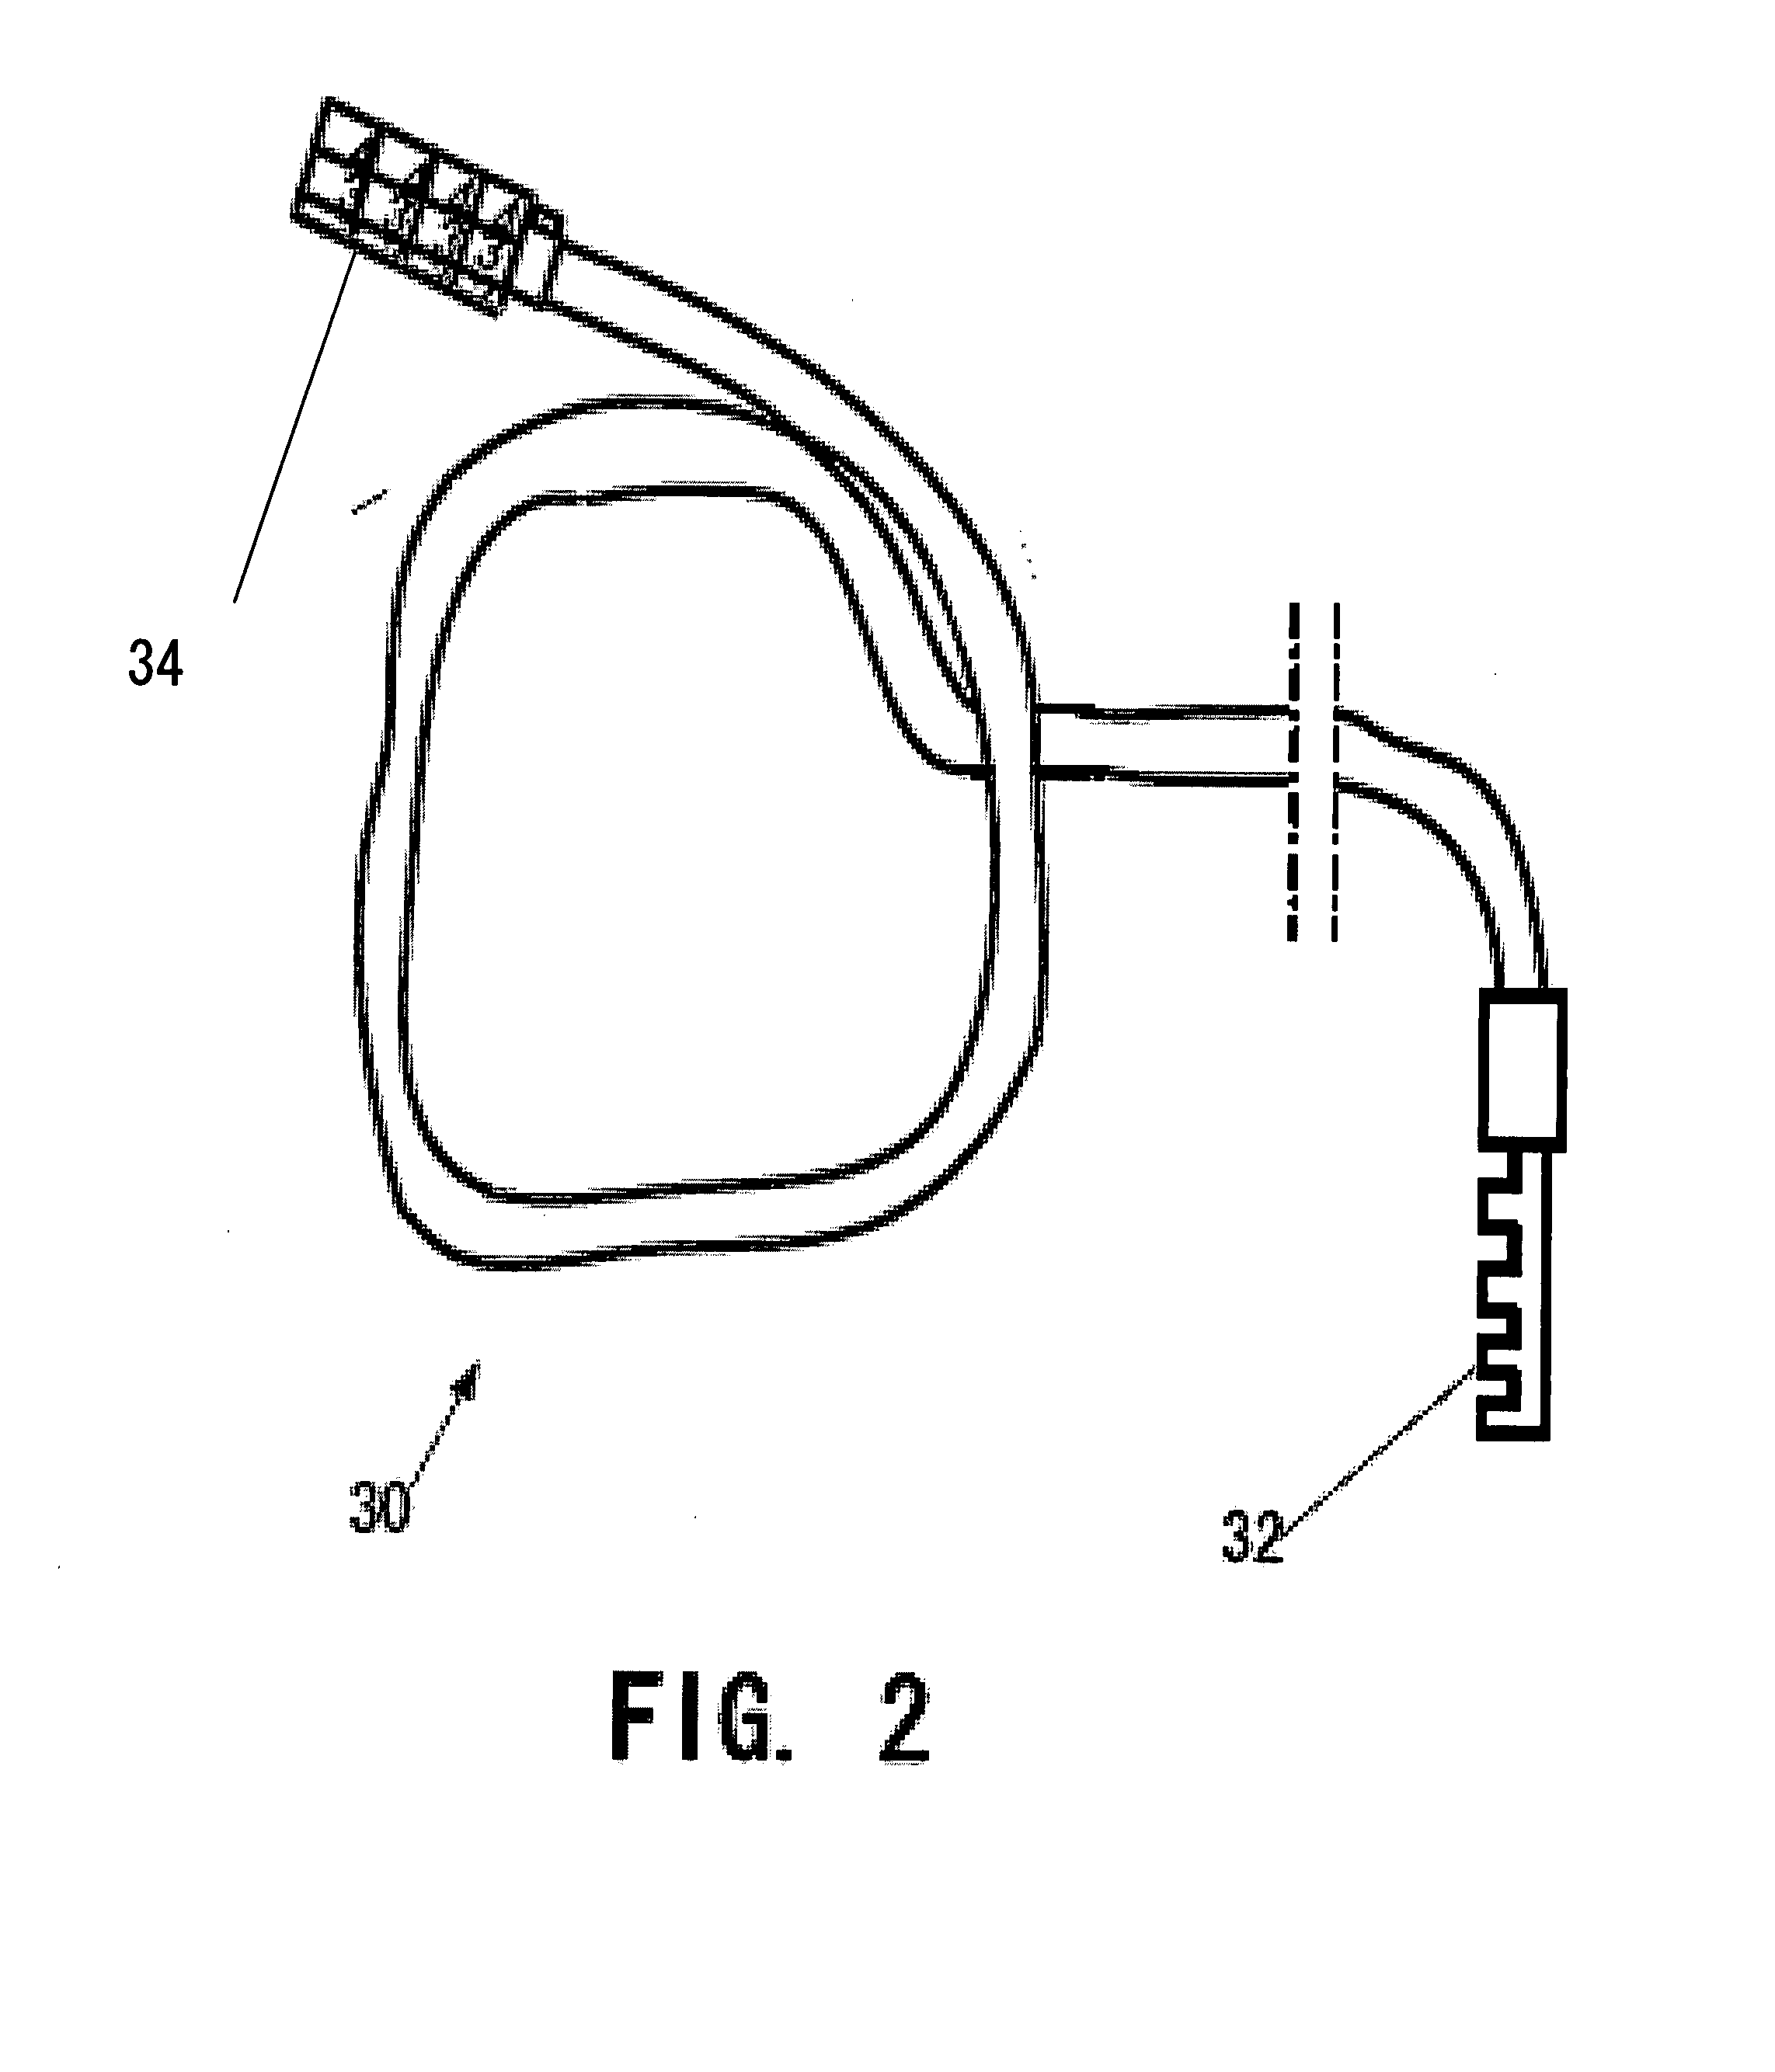 Anti-theft locking device with a flexible cable